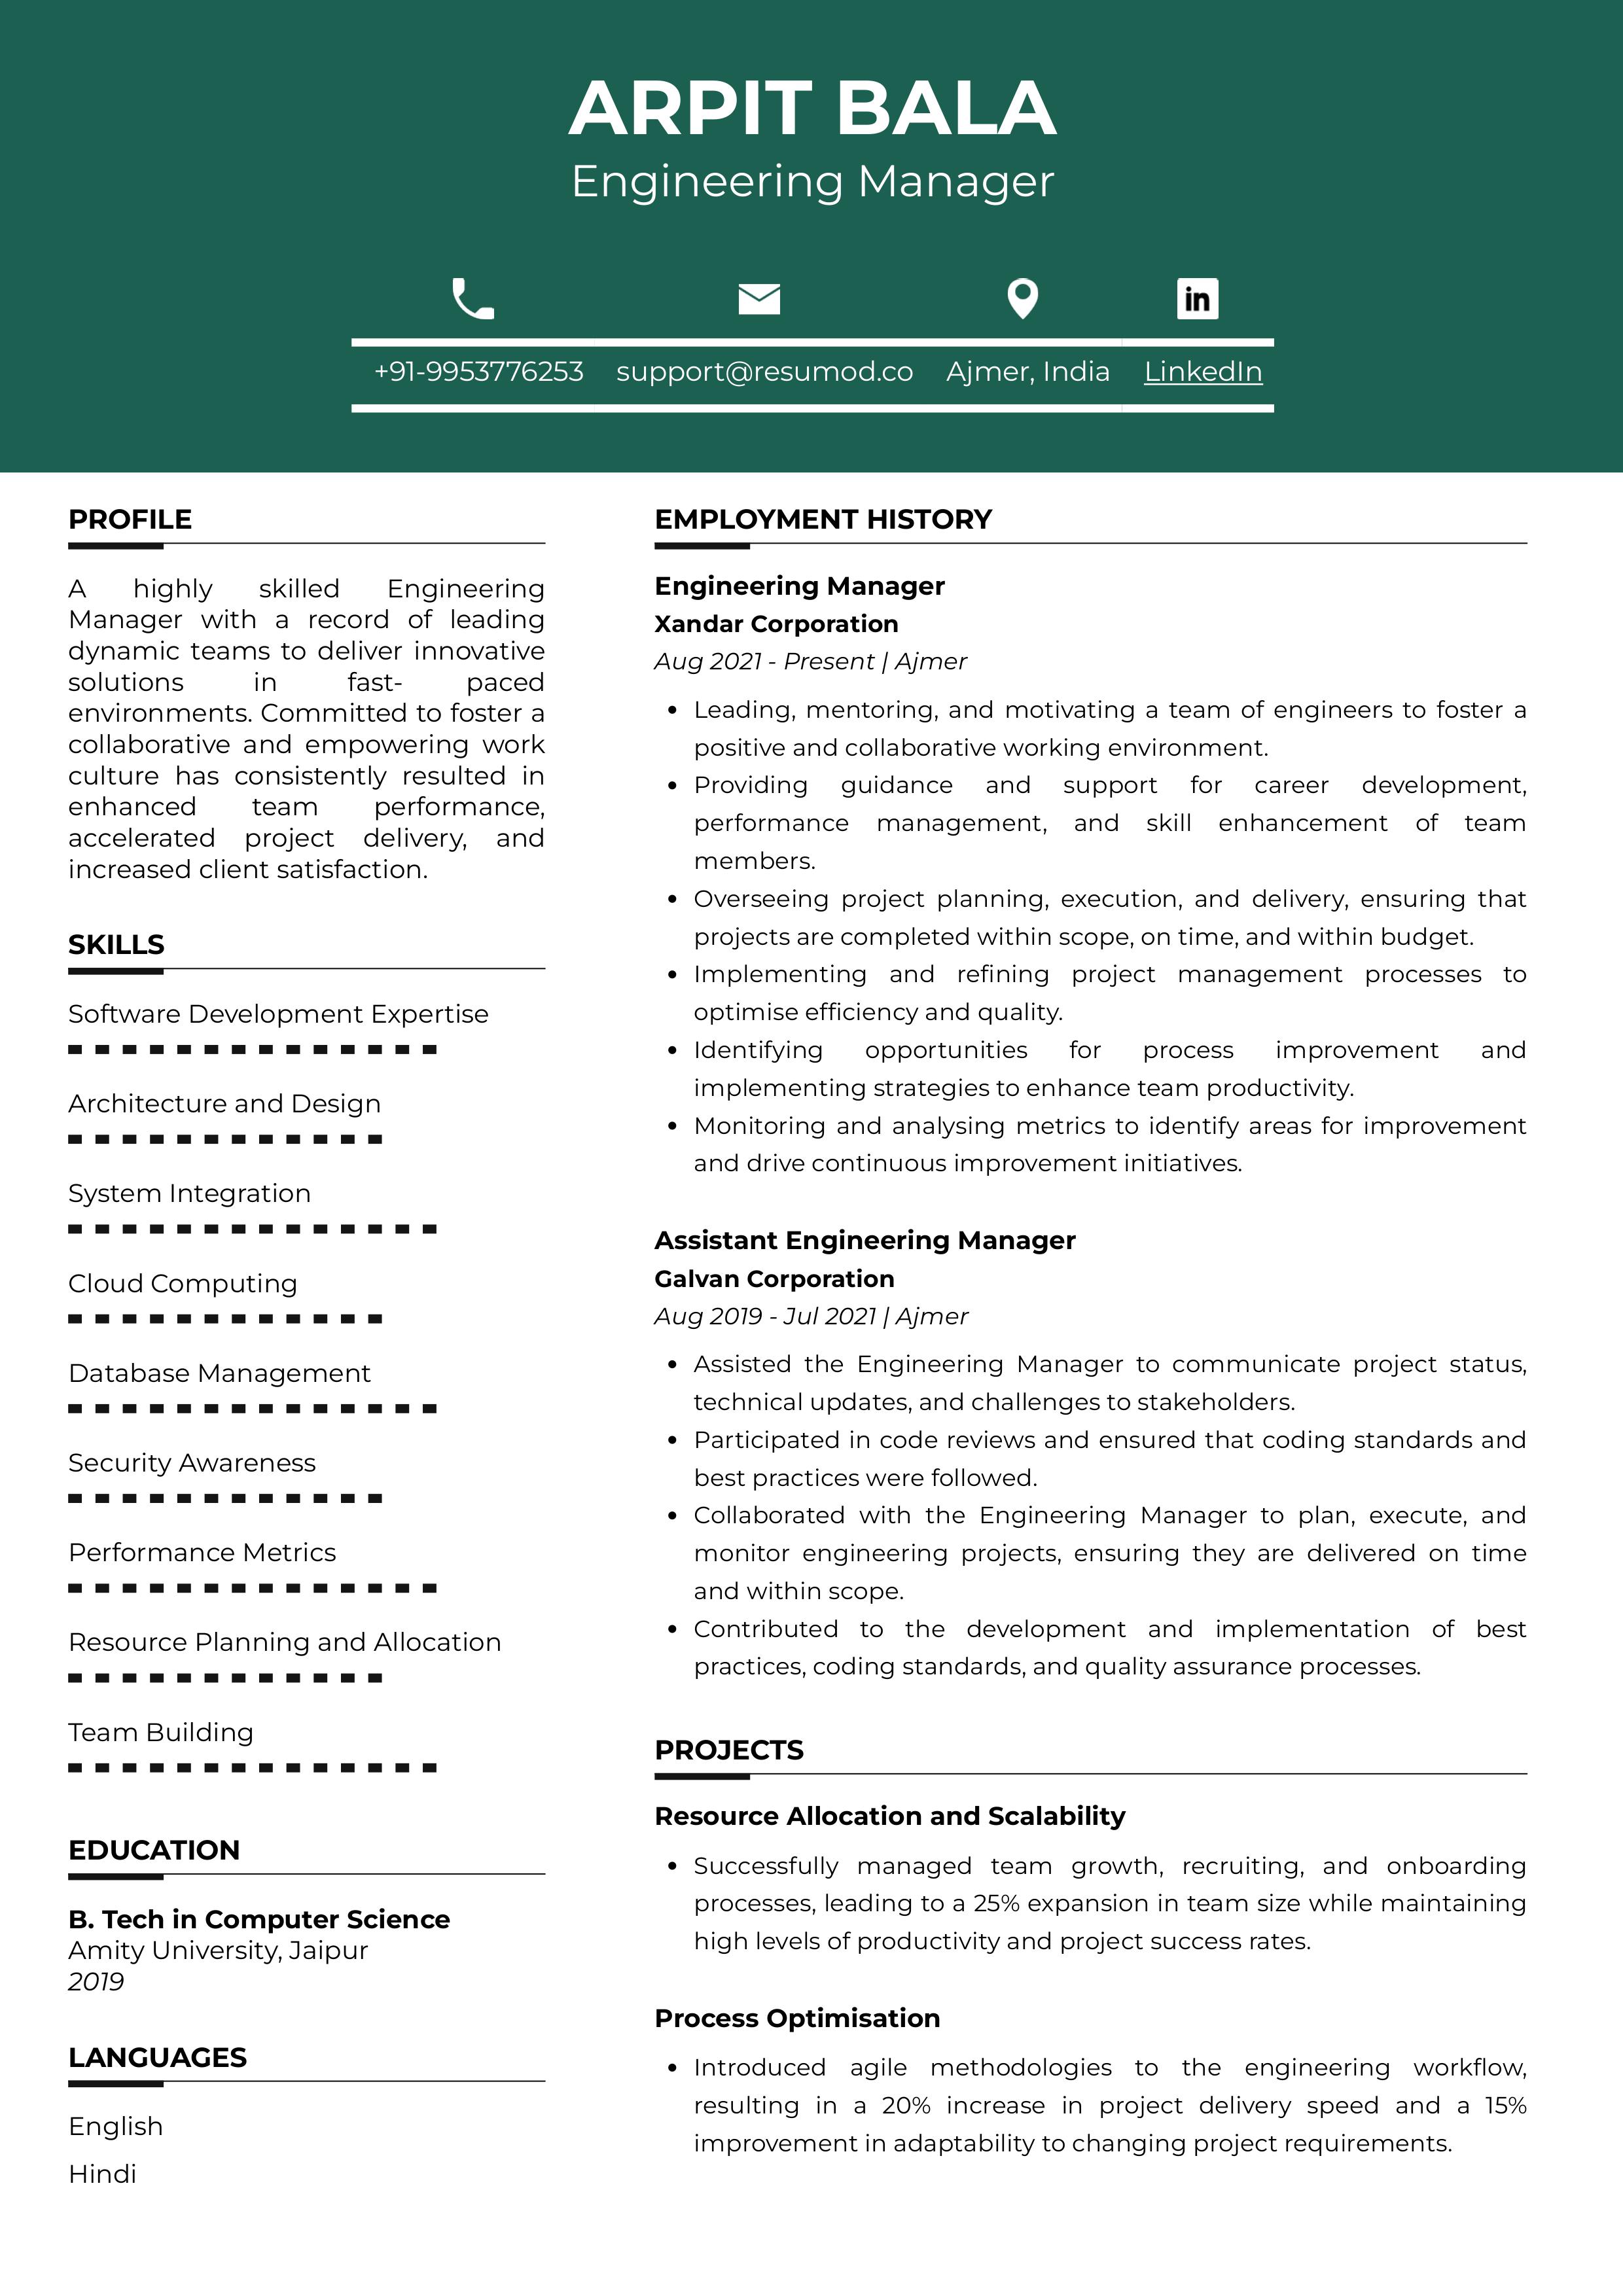 Sample Resume of Engineering Manager | Free Resume Templates & Samples on Resumod.co